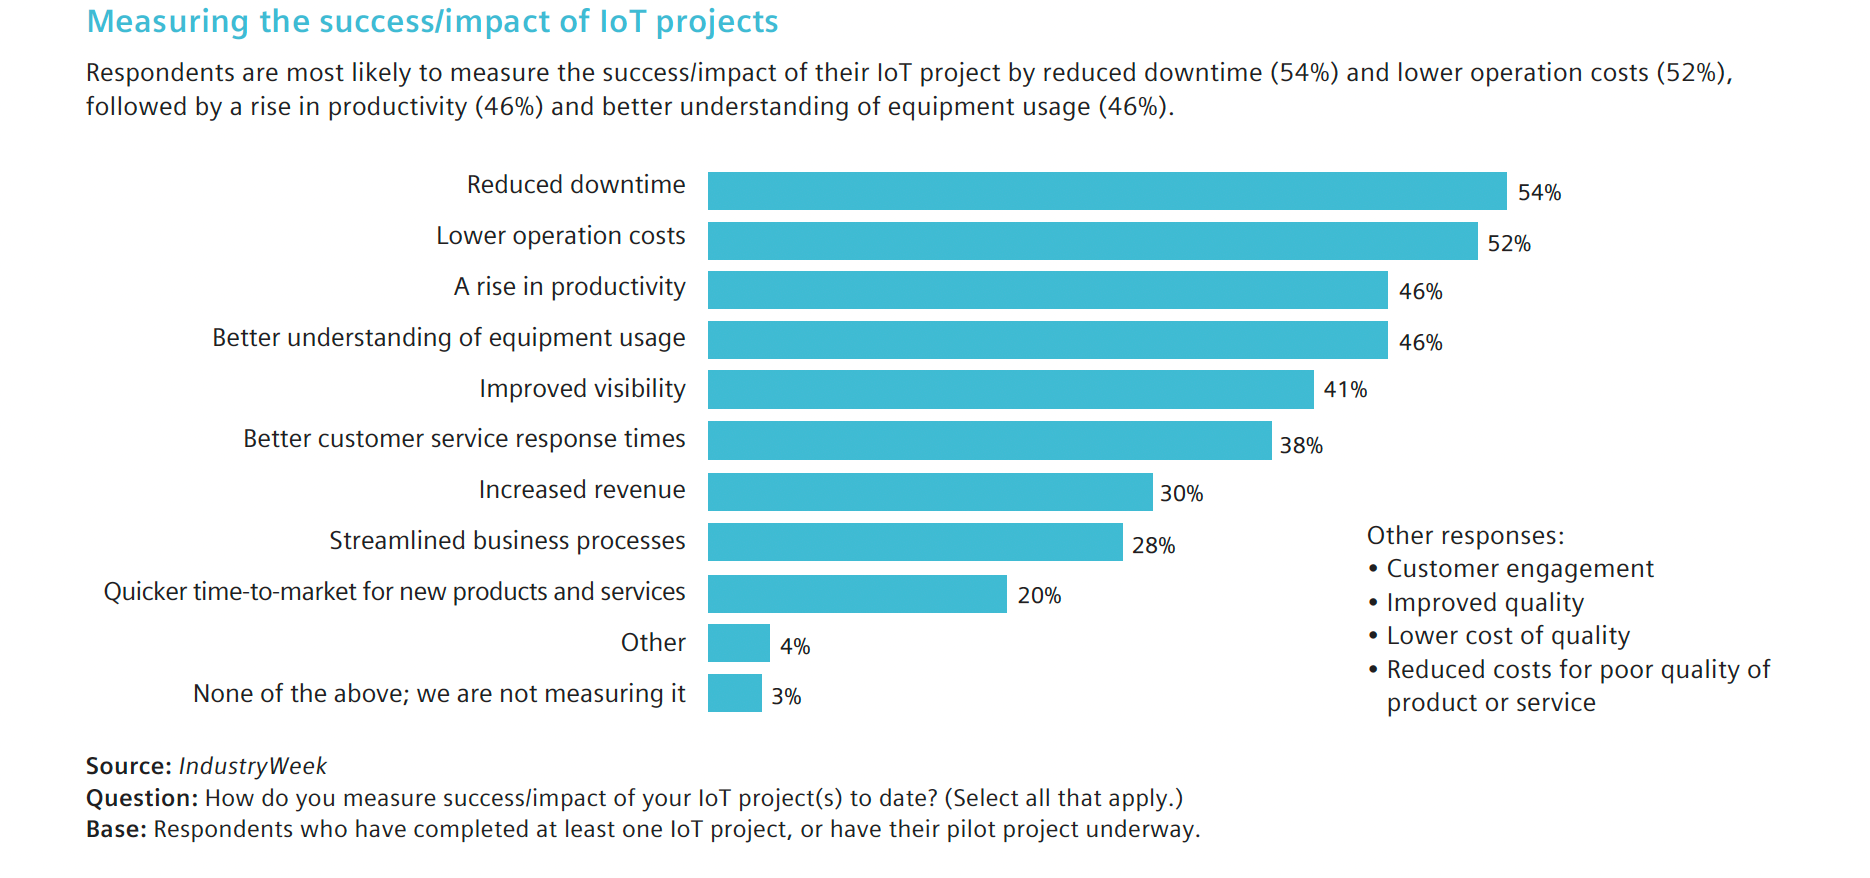 Measuring the succes (impact) of IoT projects